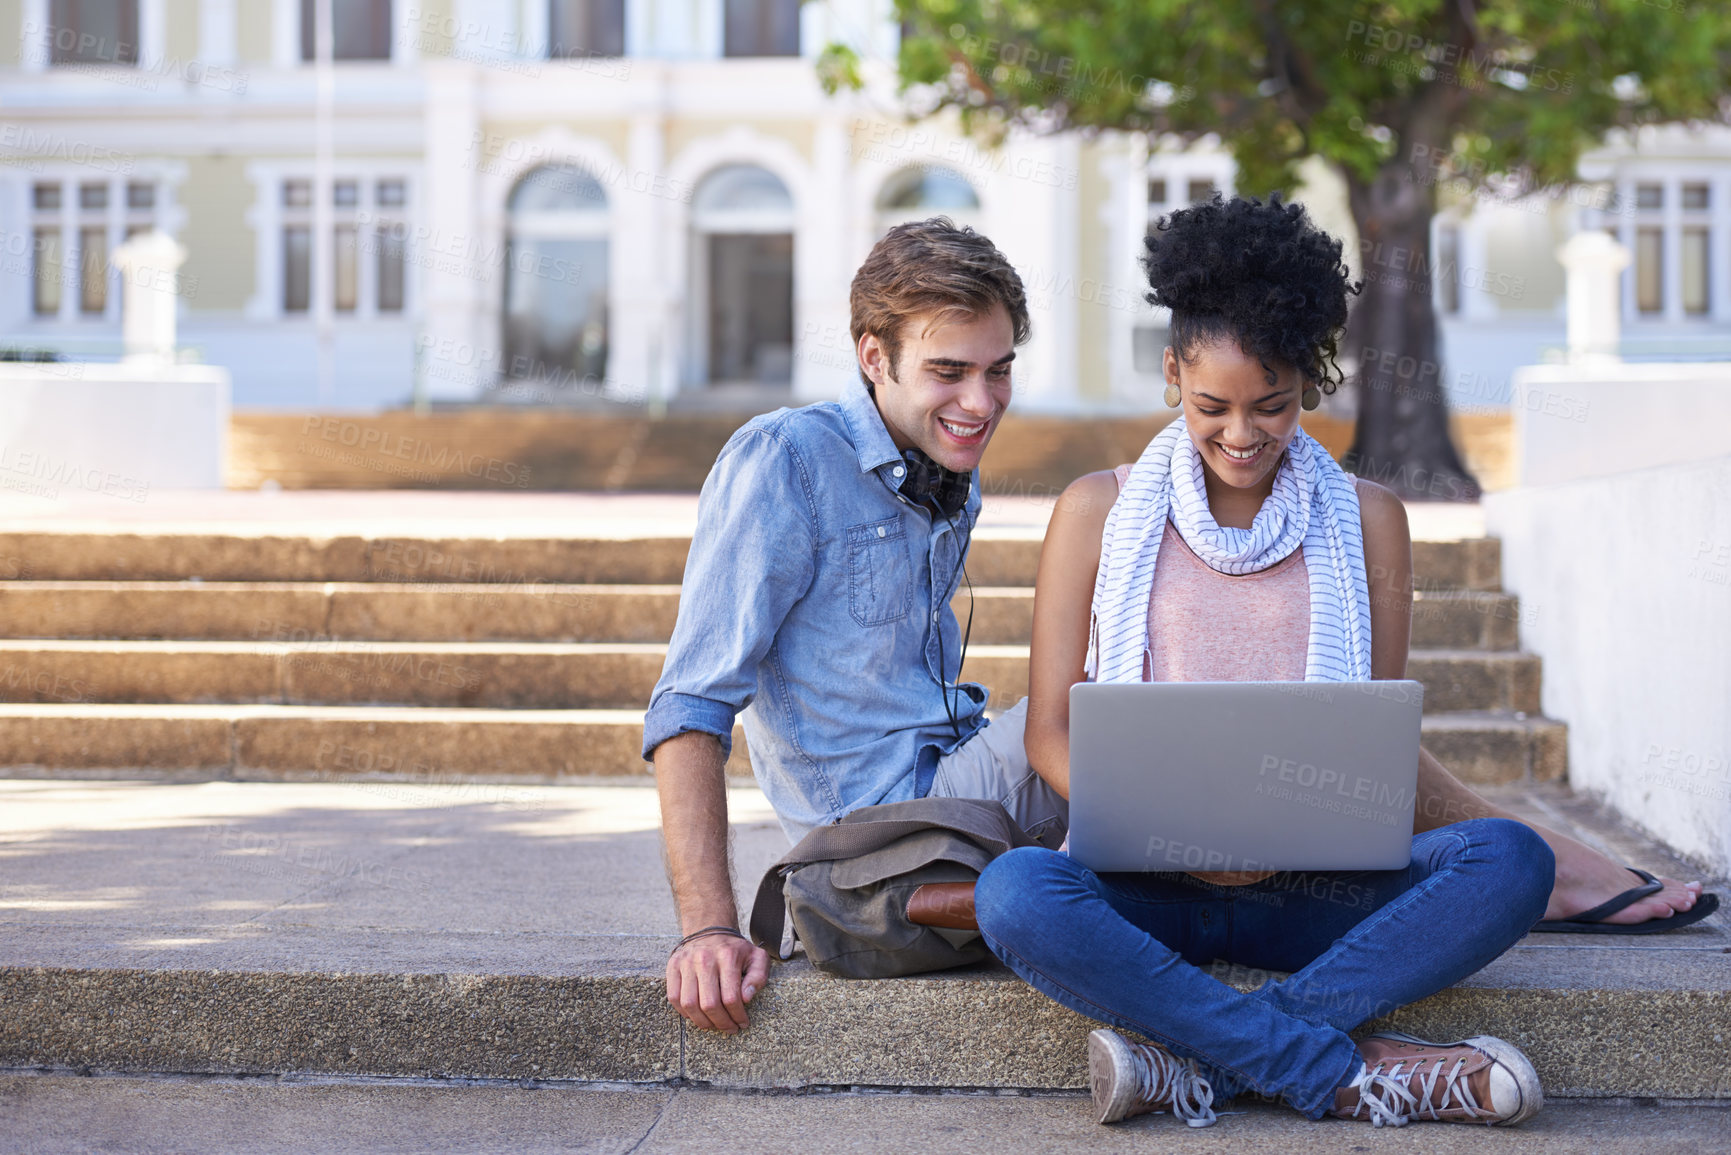 Buy stock photo Shot of two college students studying together on campus grounds